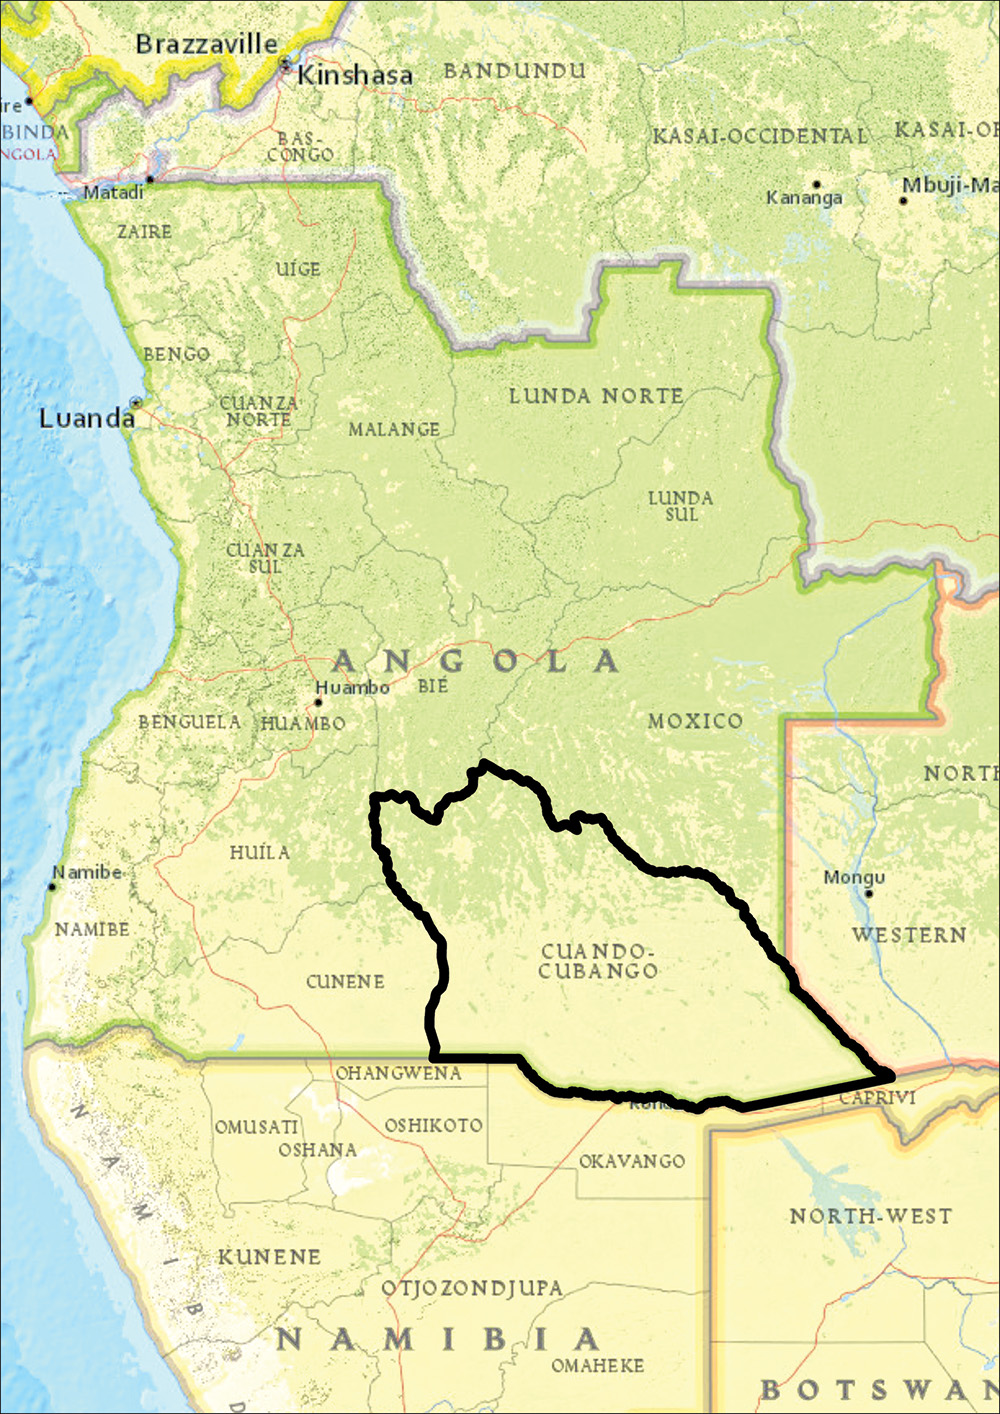 Map of Angola with Cuando-Cubango outlined